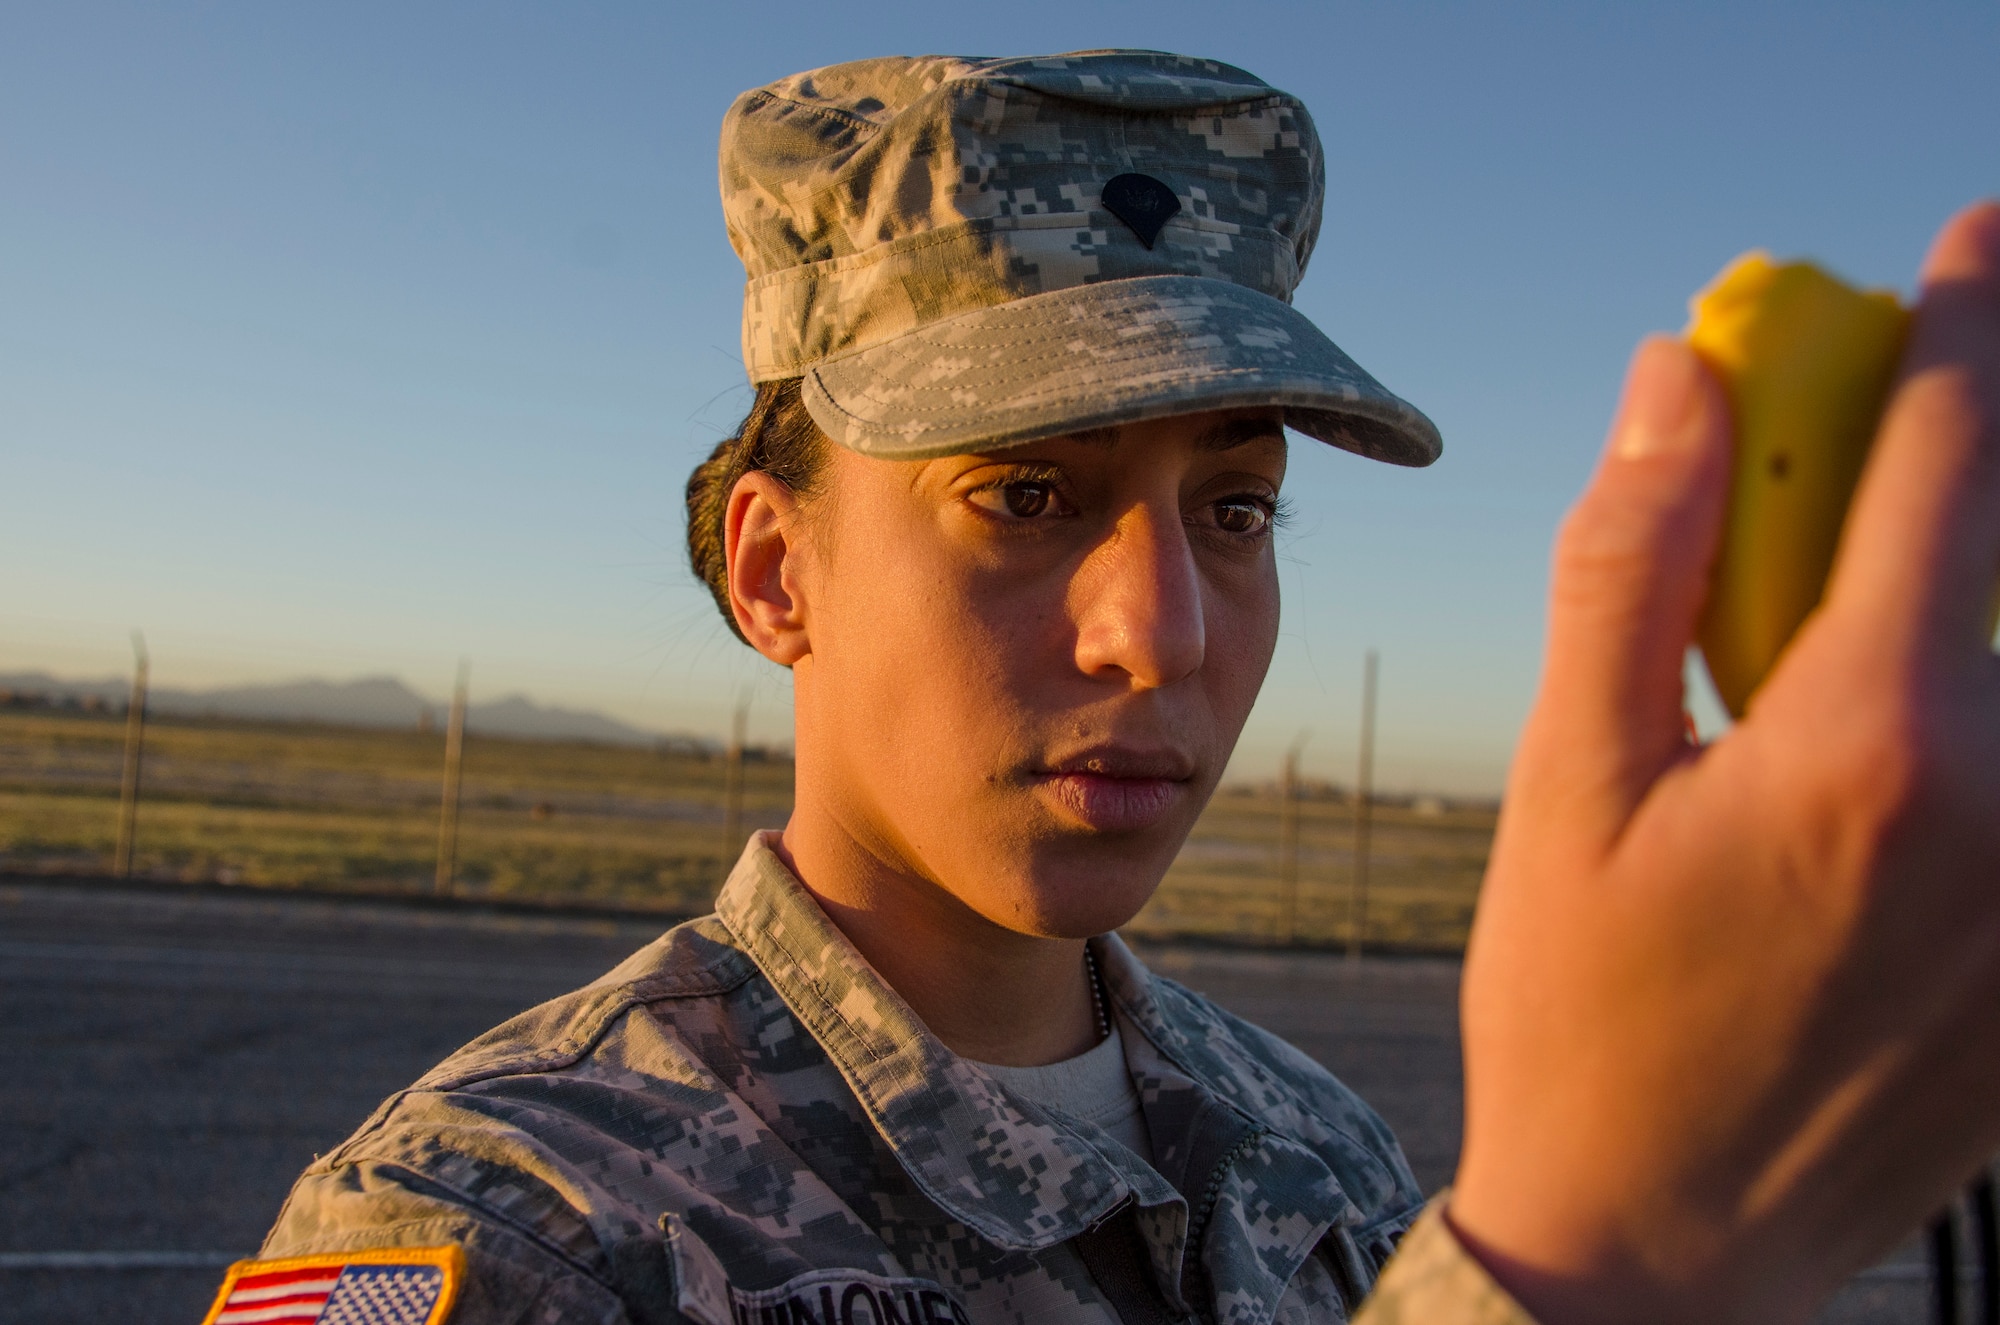 Spc. Yanira Quinones, 1st Battlefield Coordination Detachment Human Resources Specialists, keeps track of the amount of time left for members of the 1st BCD to complete the sit-up portion of the Army physical fitness test at Davis-Monthan AFB, Ariz., Nov. 4, 2014. The test is a way to measure a soldier's ability to effectively move his or her body by using their major muscle groups and cardiograms. (U.S. Air Force photo by Staff Sgt. Adam Grant/Released)